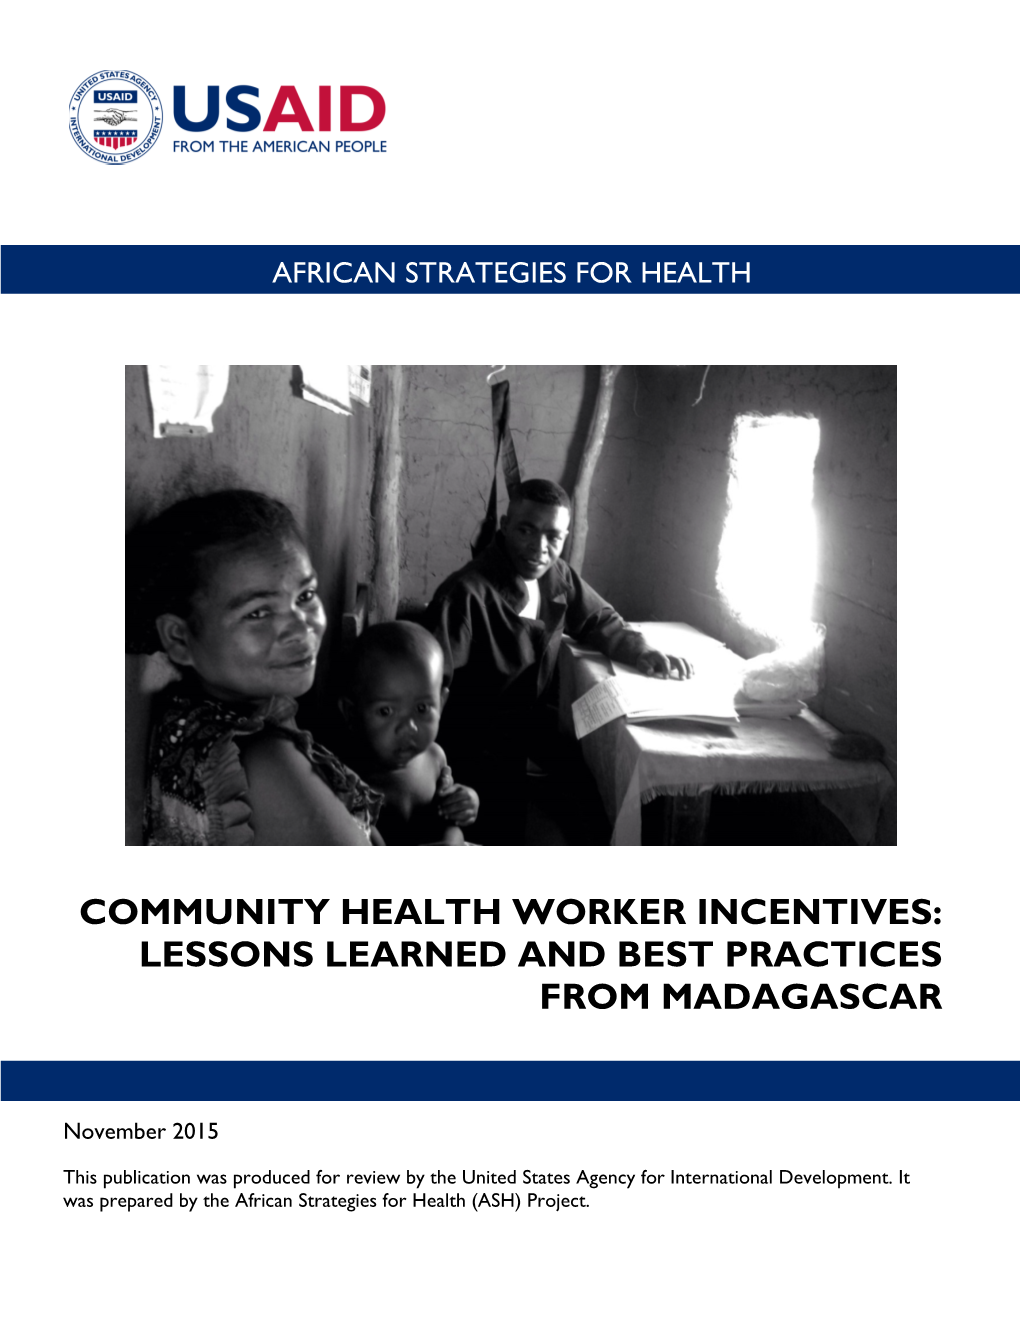 Community Health Worker Incentives: Lessons Learned and Best Practices from Madagascar